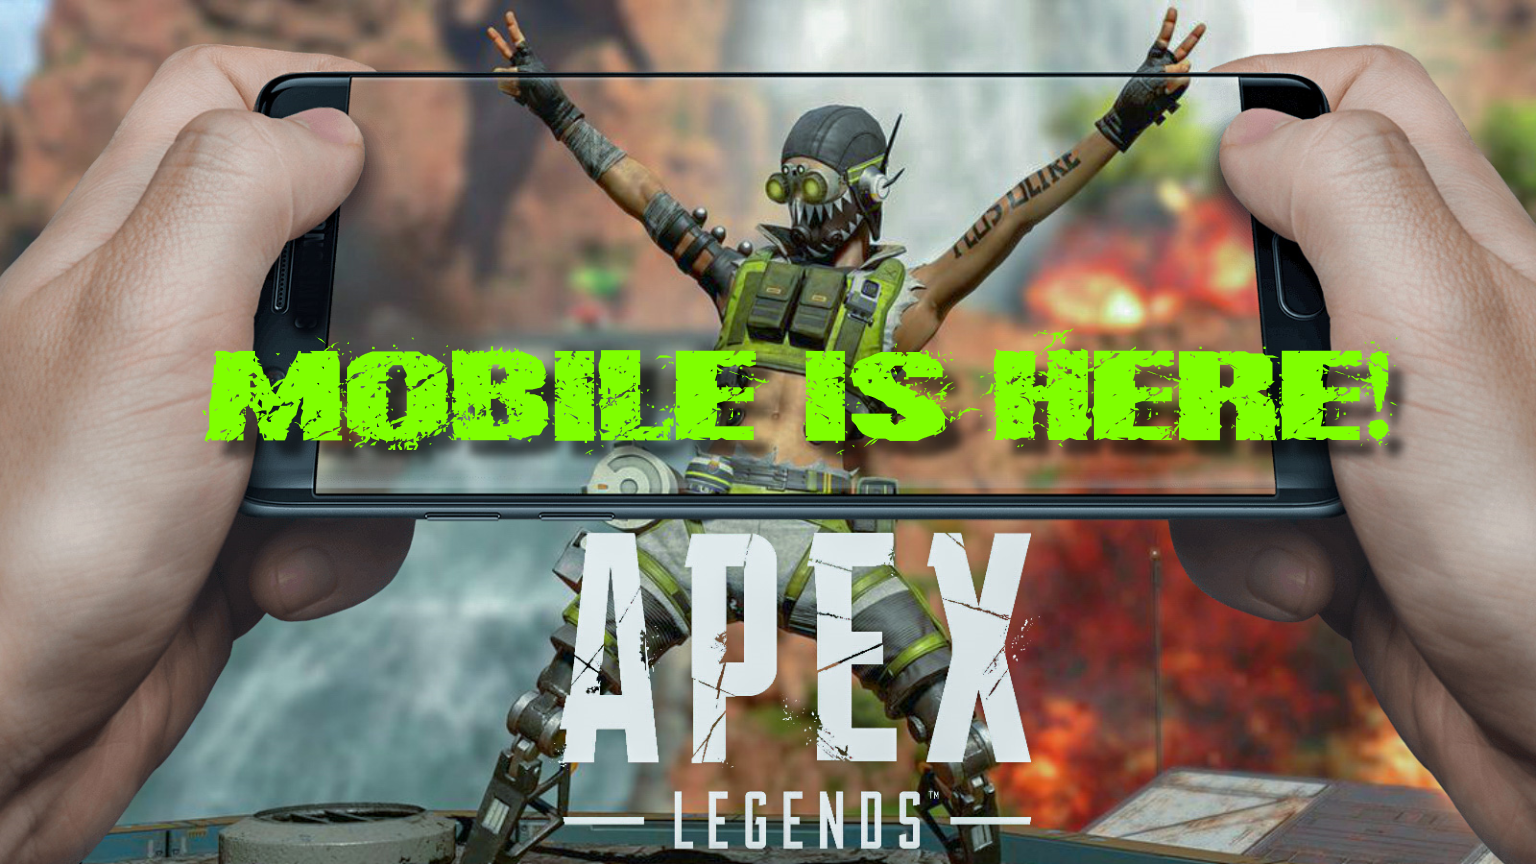 How to download and play Apex Legends Mobile in Android. Step-by